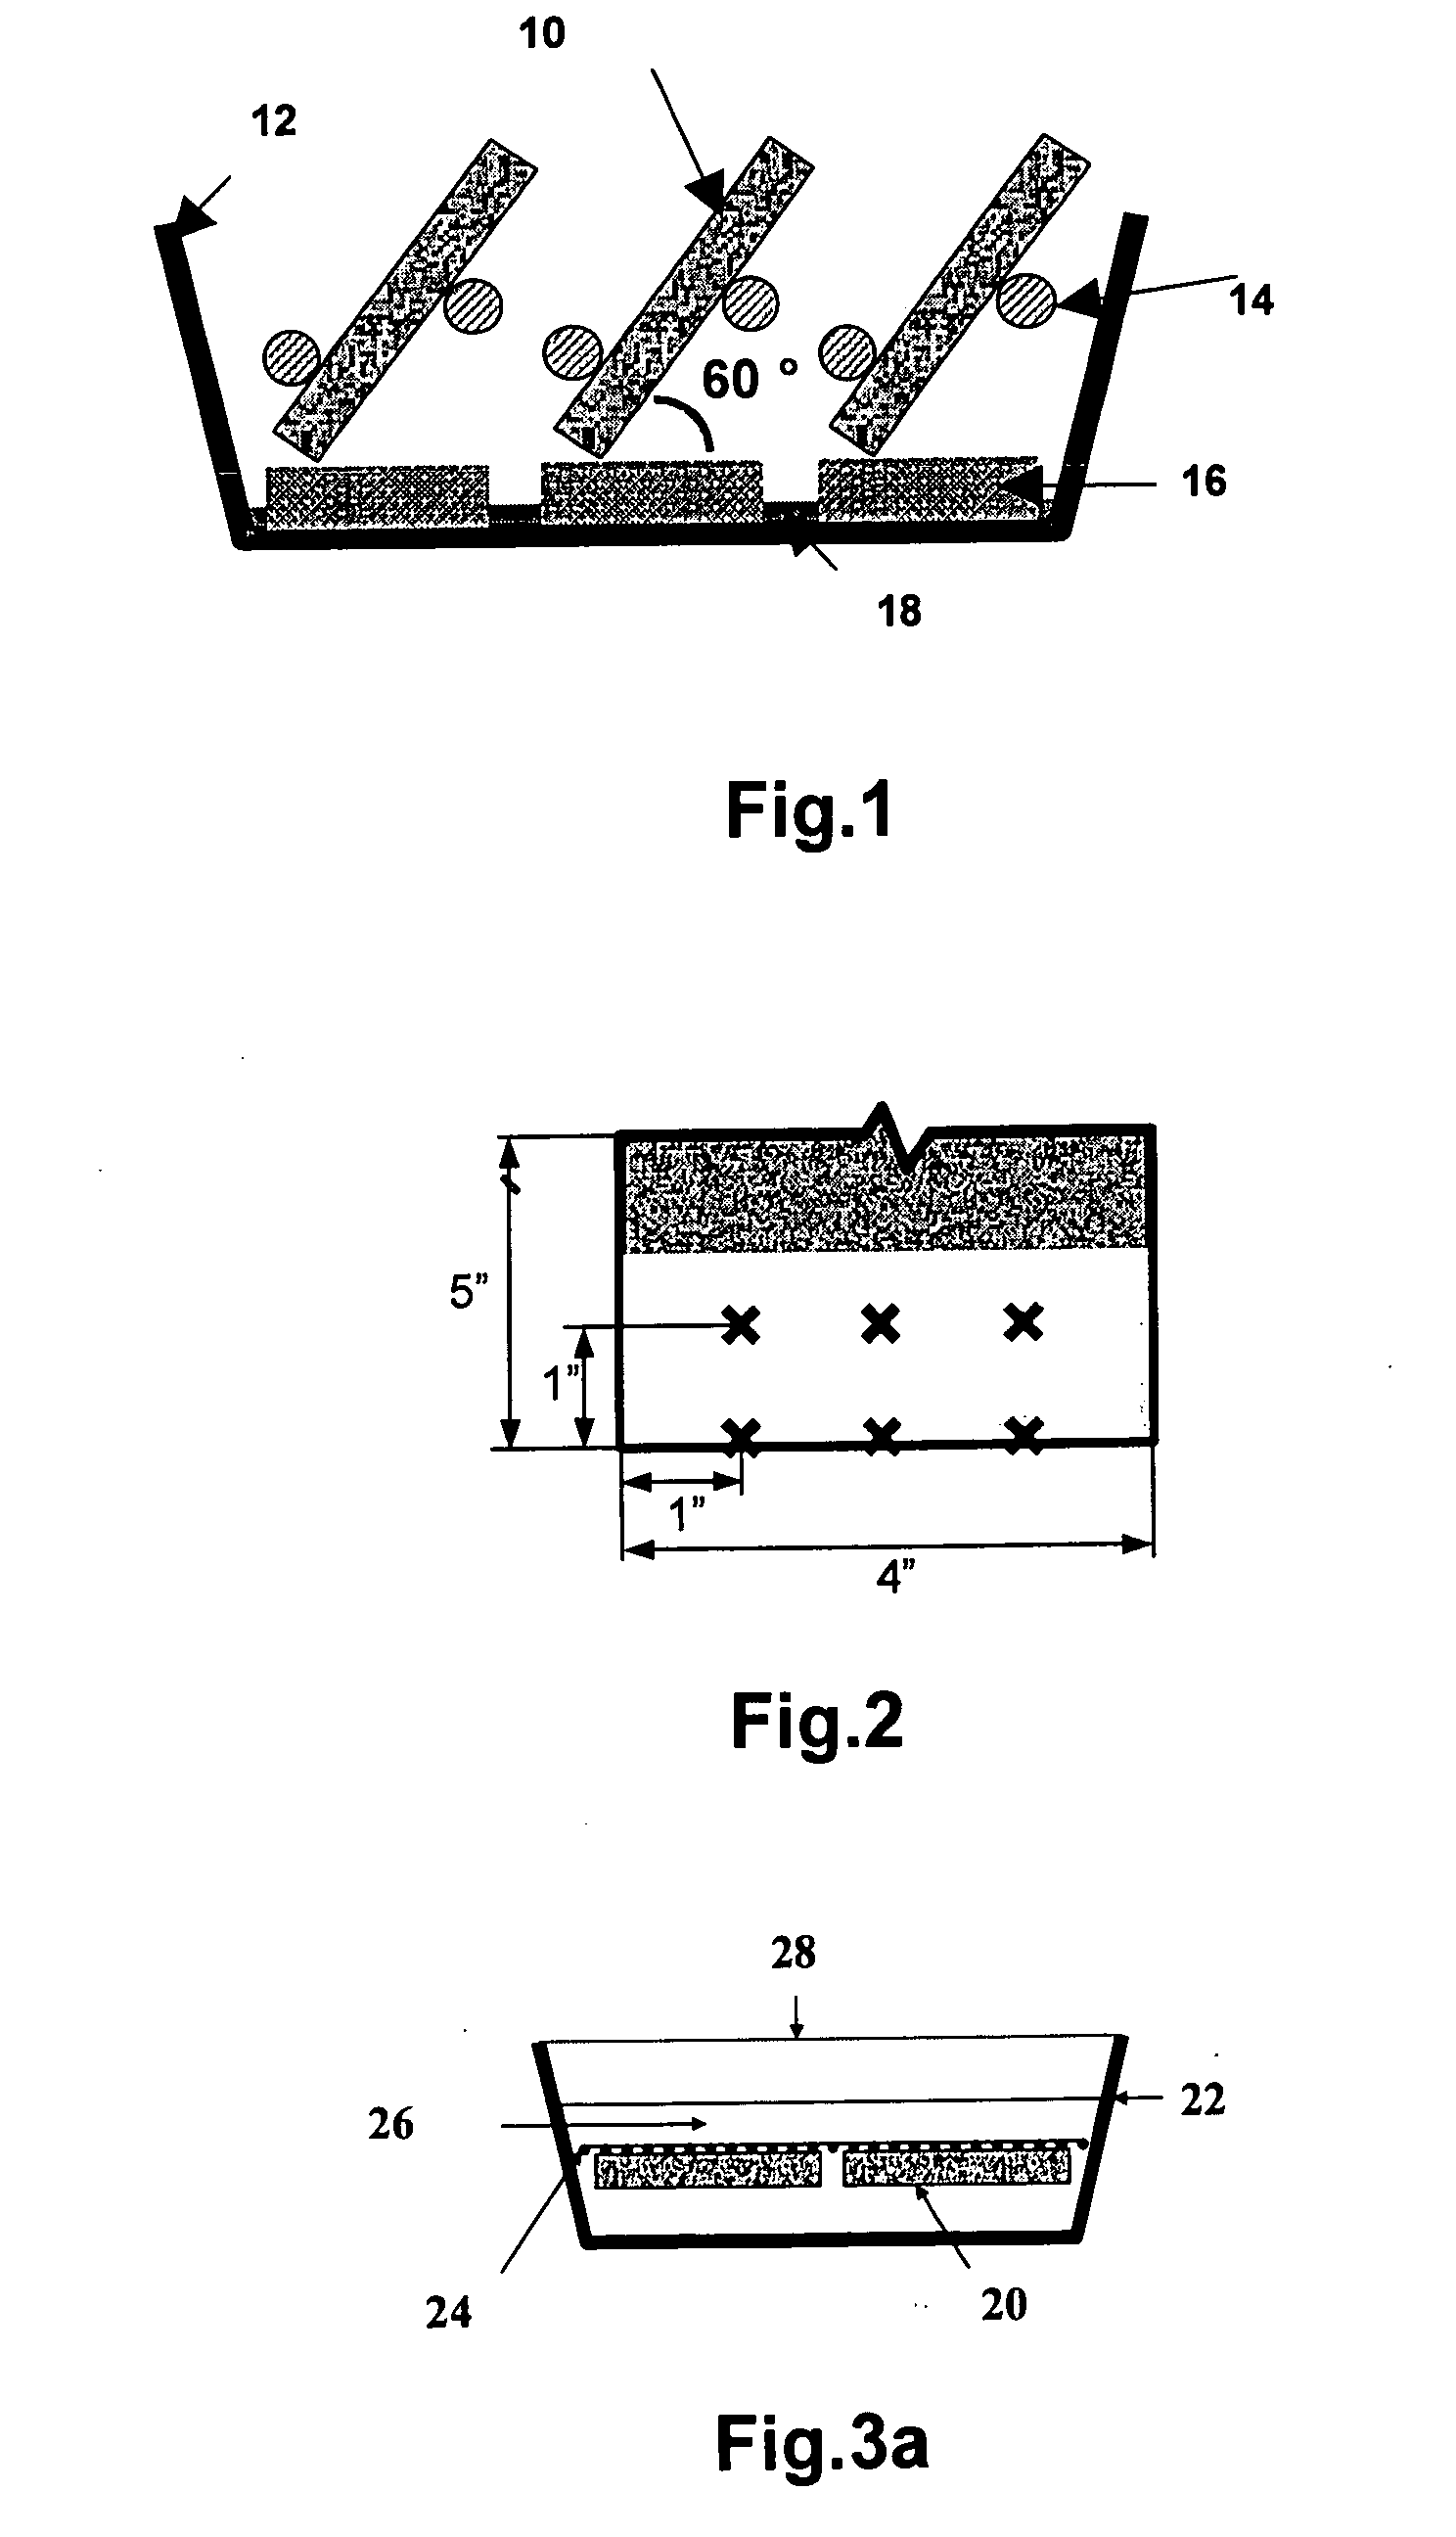 Multifunctional reinforcement system for wood composite panels